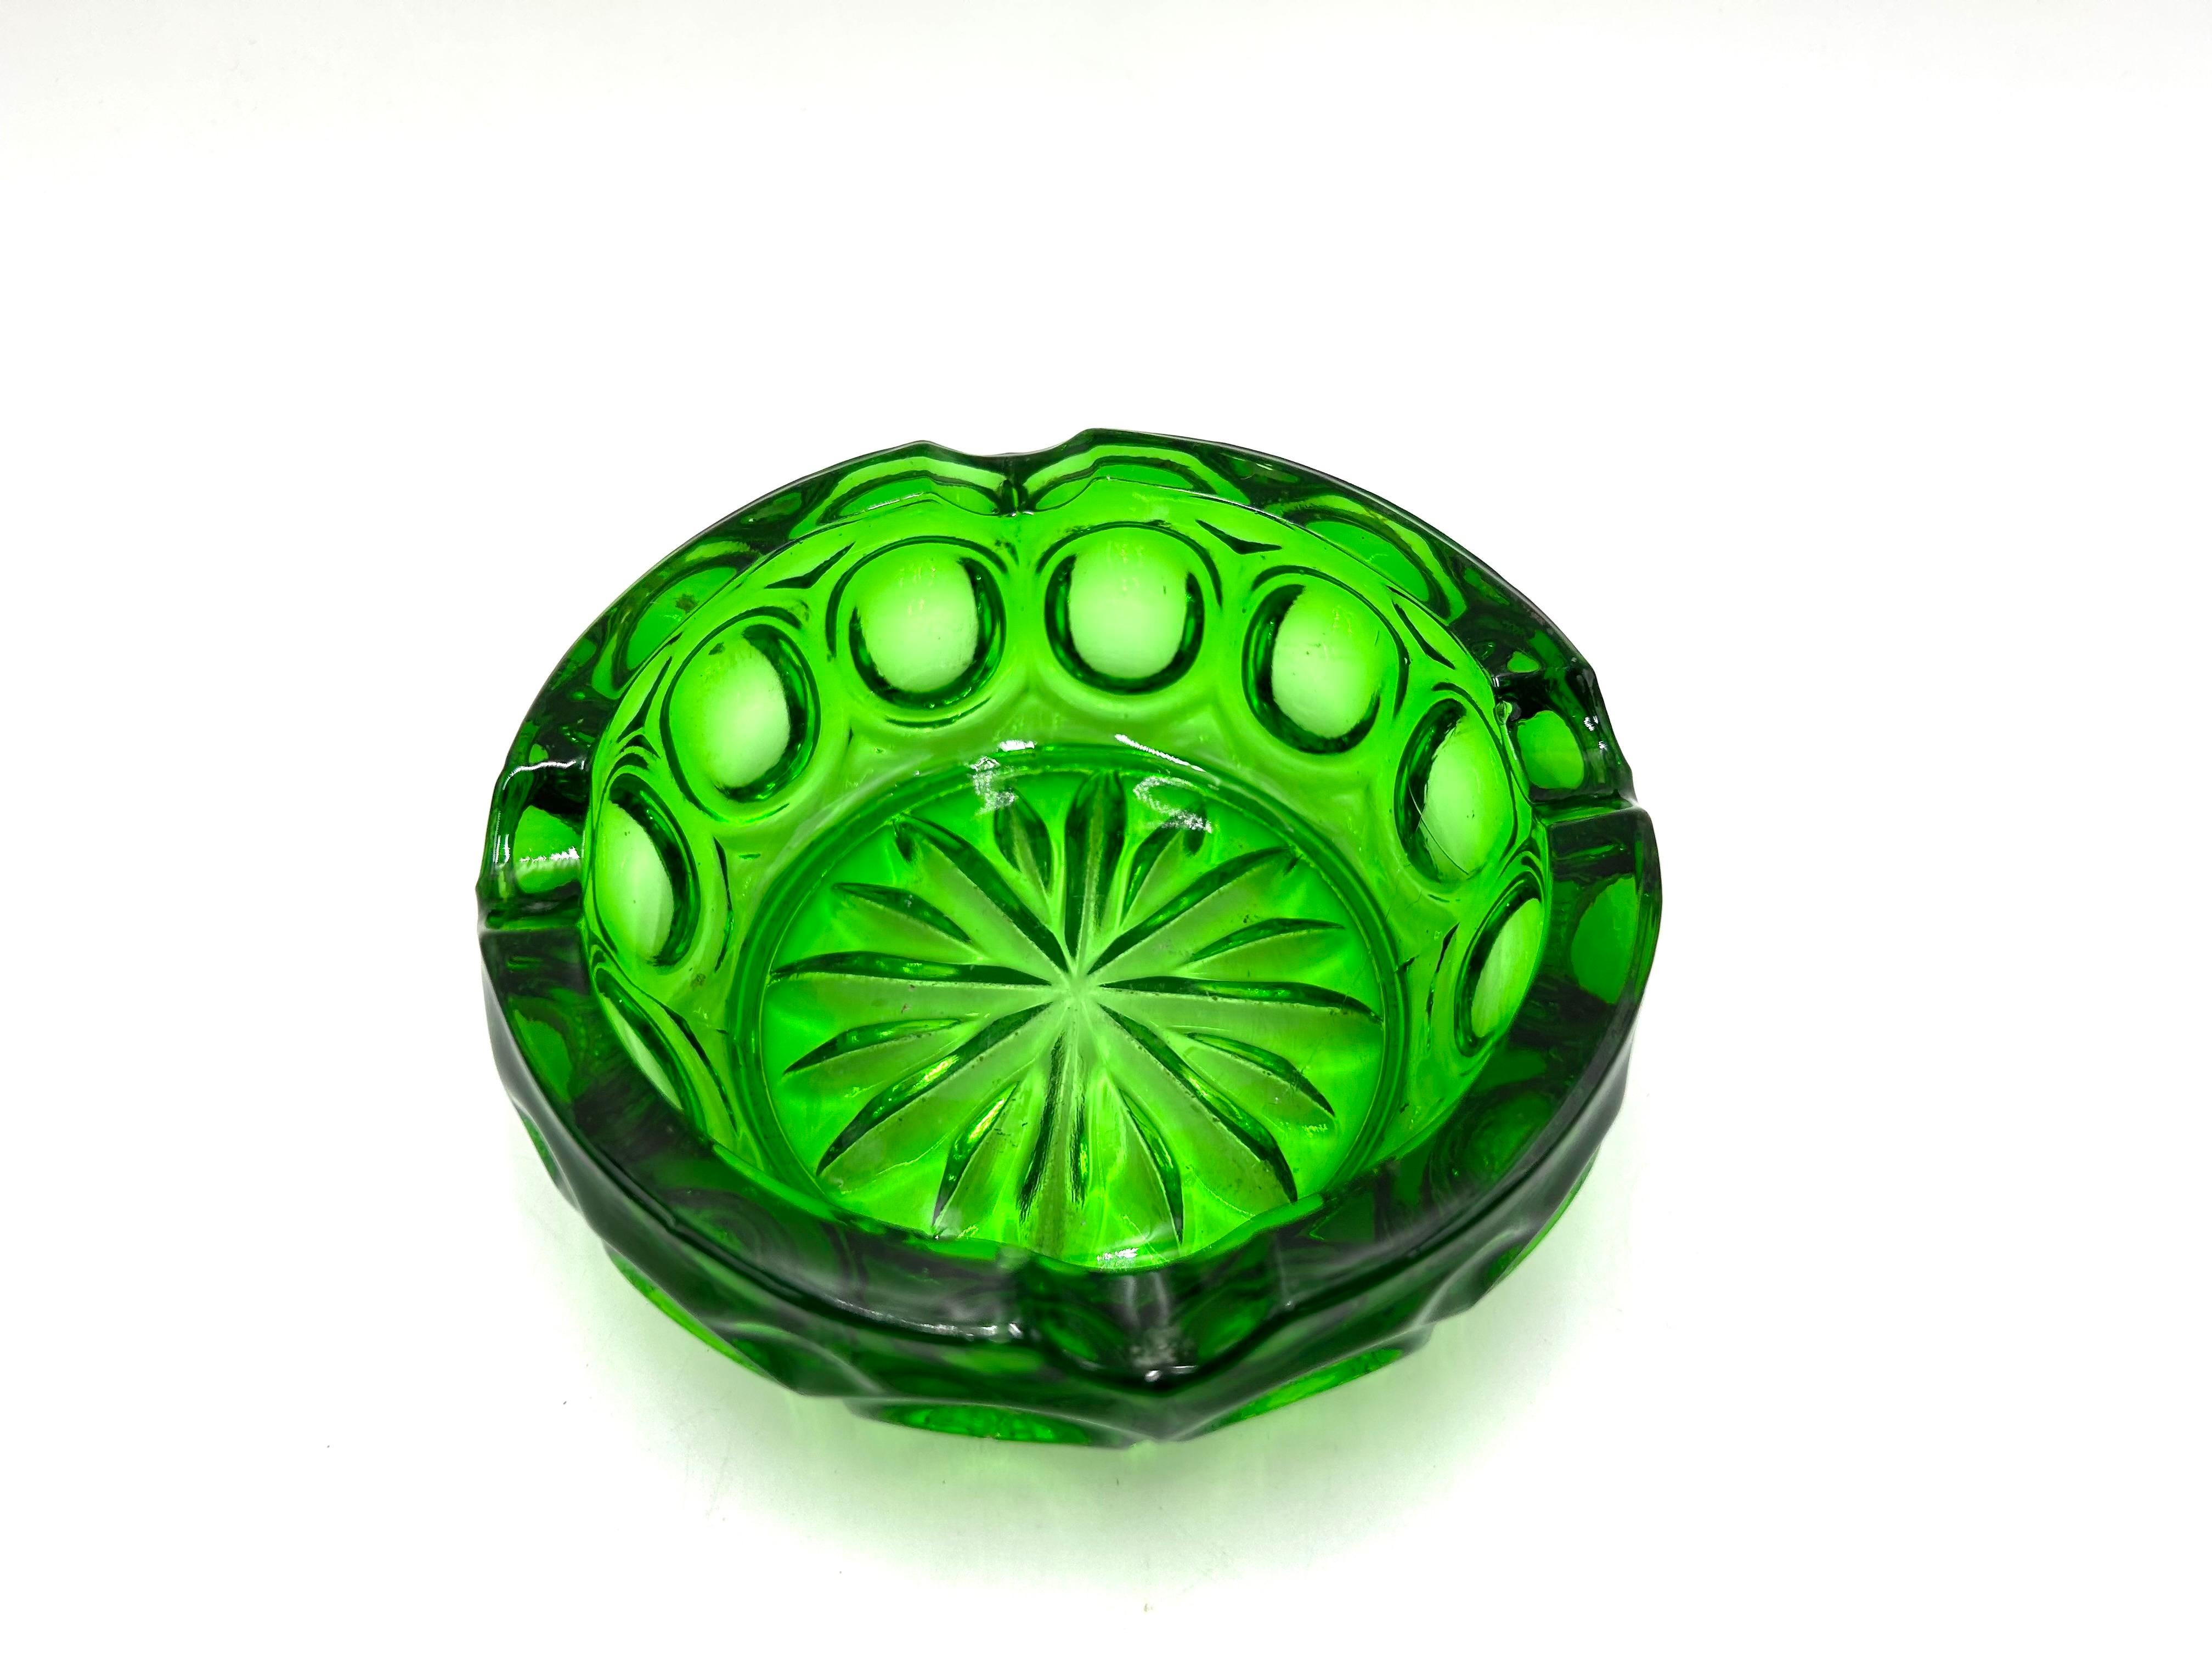 Glass green ashtray made in Czechoslovakia in the 1960s

Very good condition, no damage

height 5 cm, diameter 14 cm.